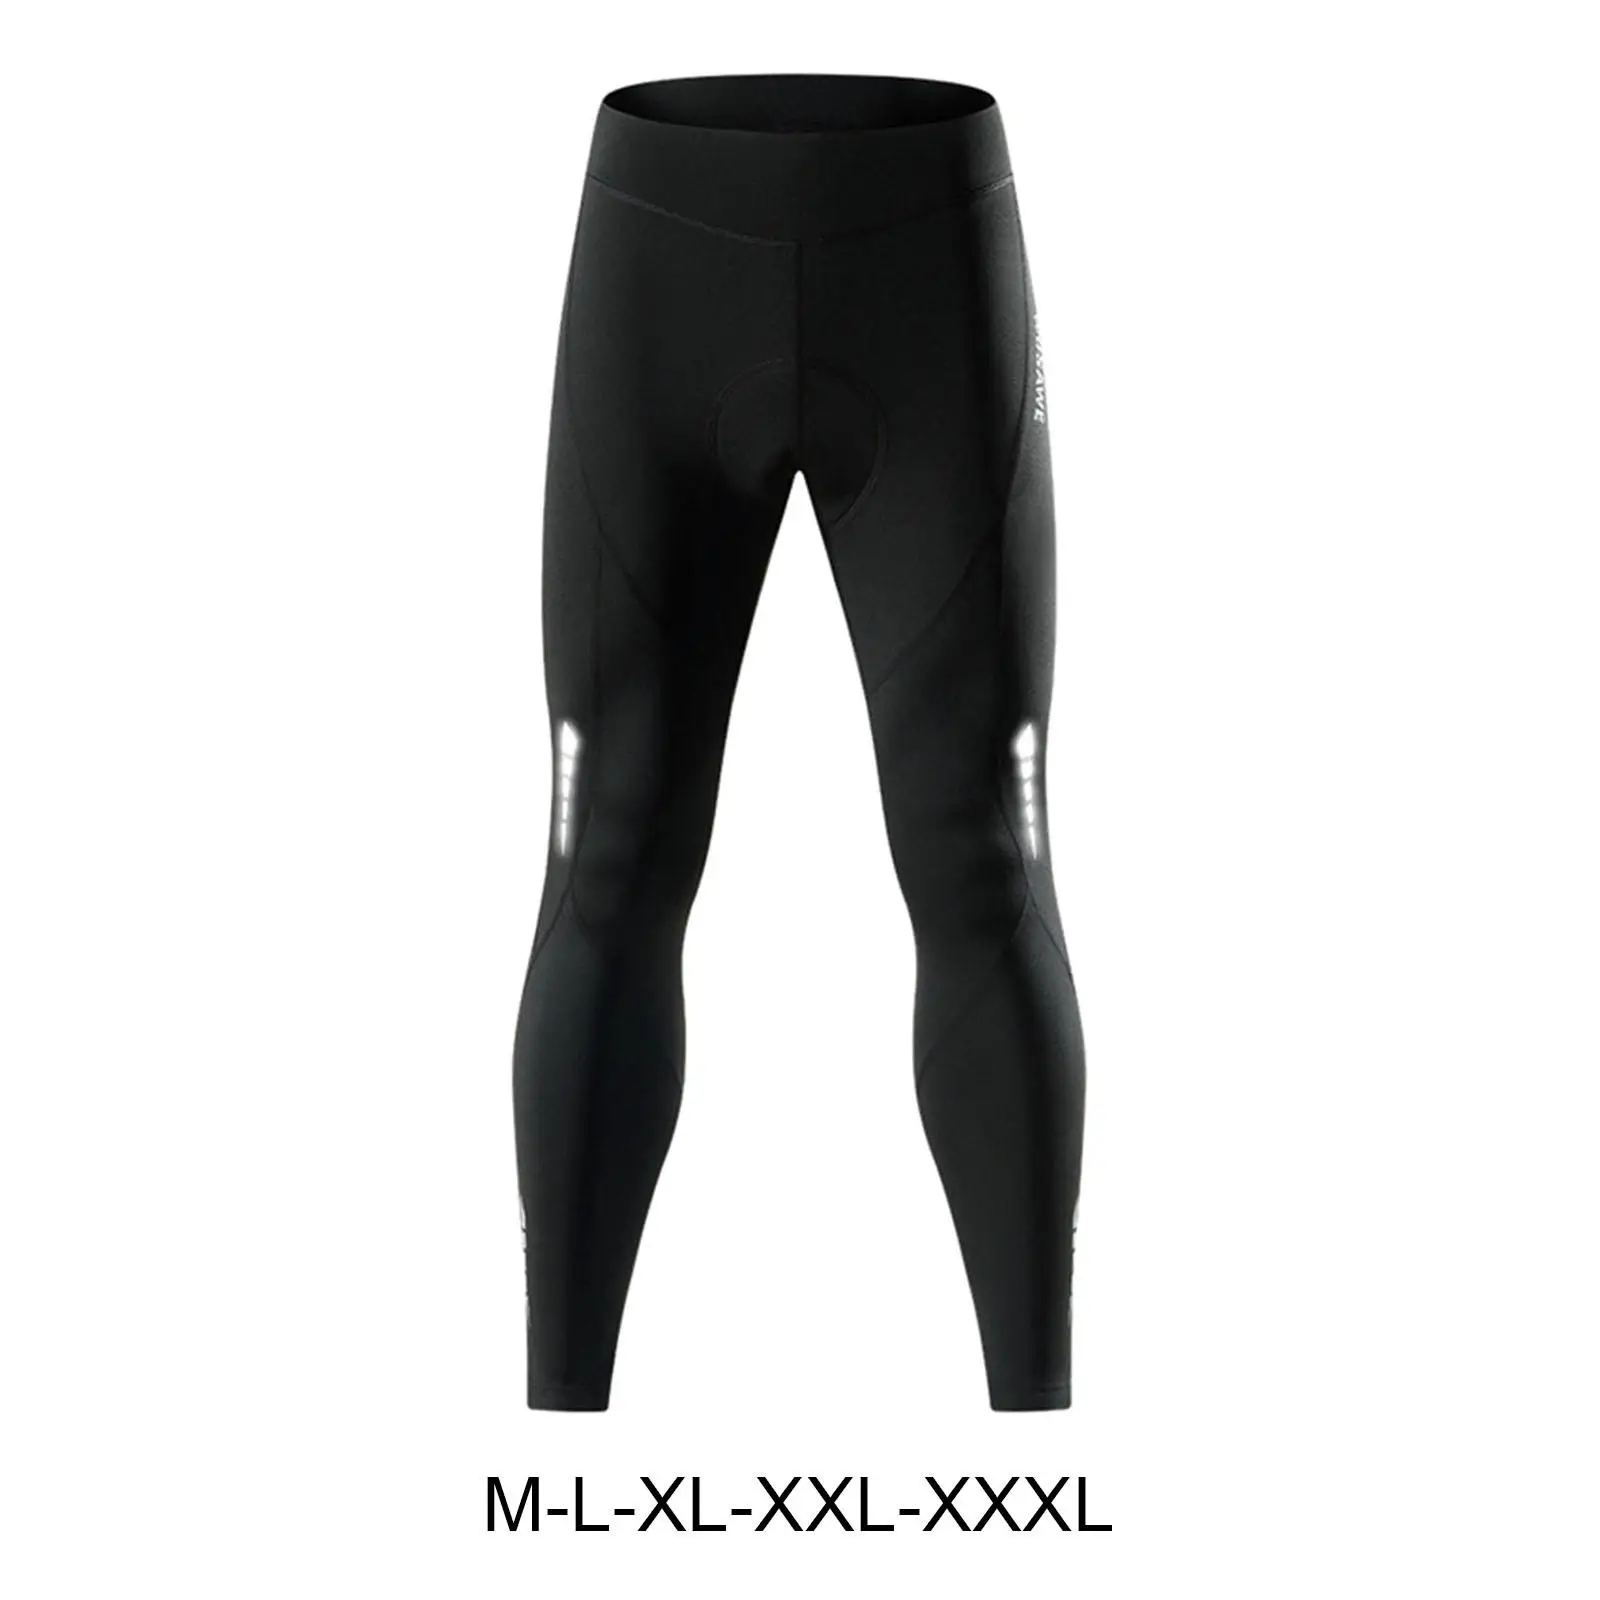 Cycling Pants for Men Fleece Road Bicycle with Reflective Strip Keep Warm